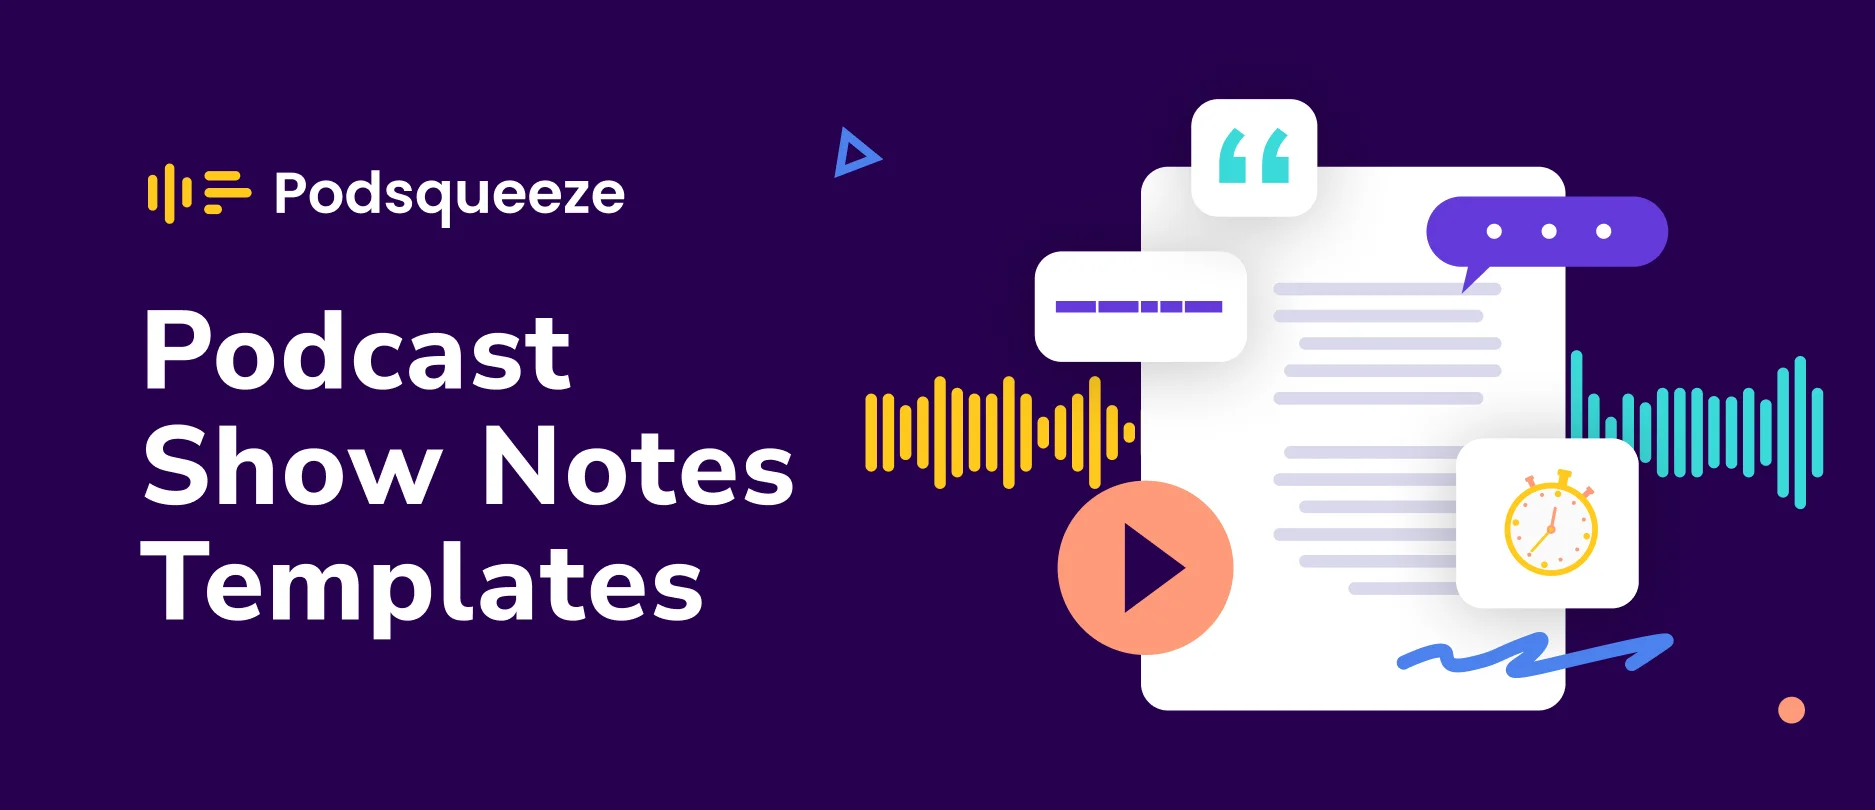 podcast show notes templates